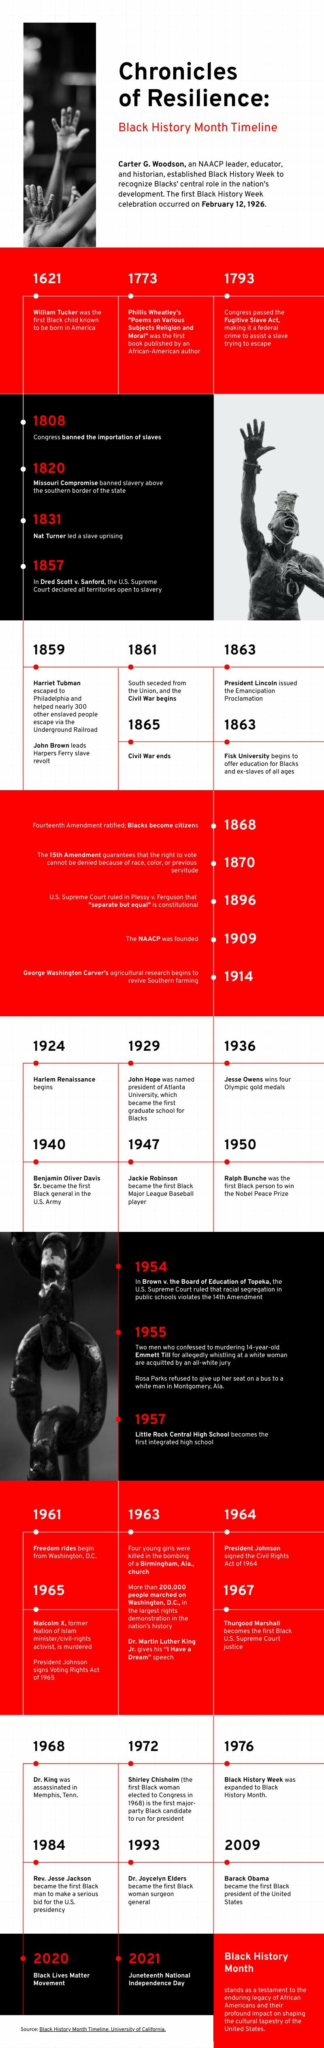 History of Black History Month Infographic